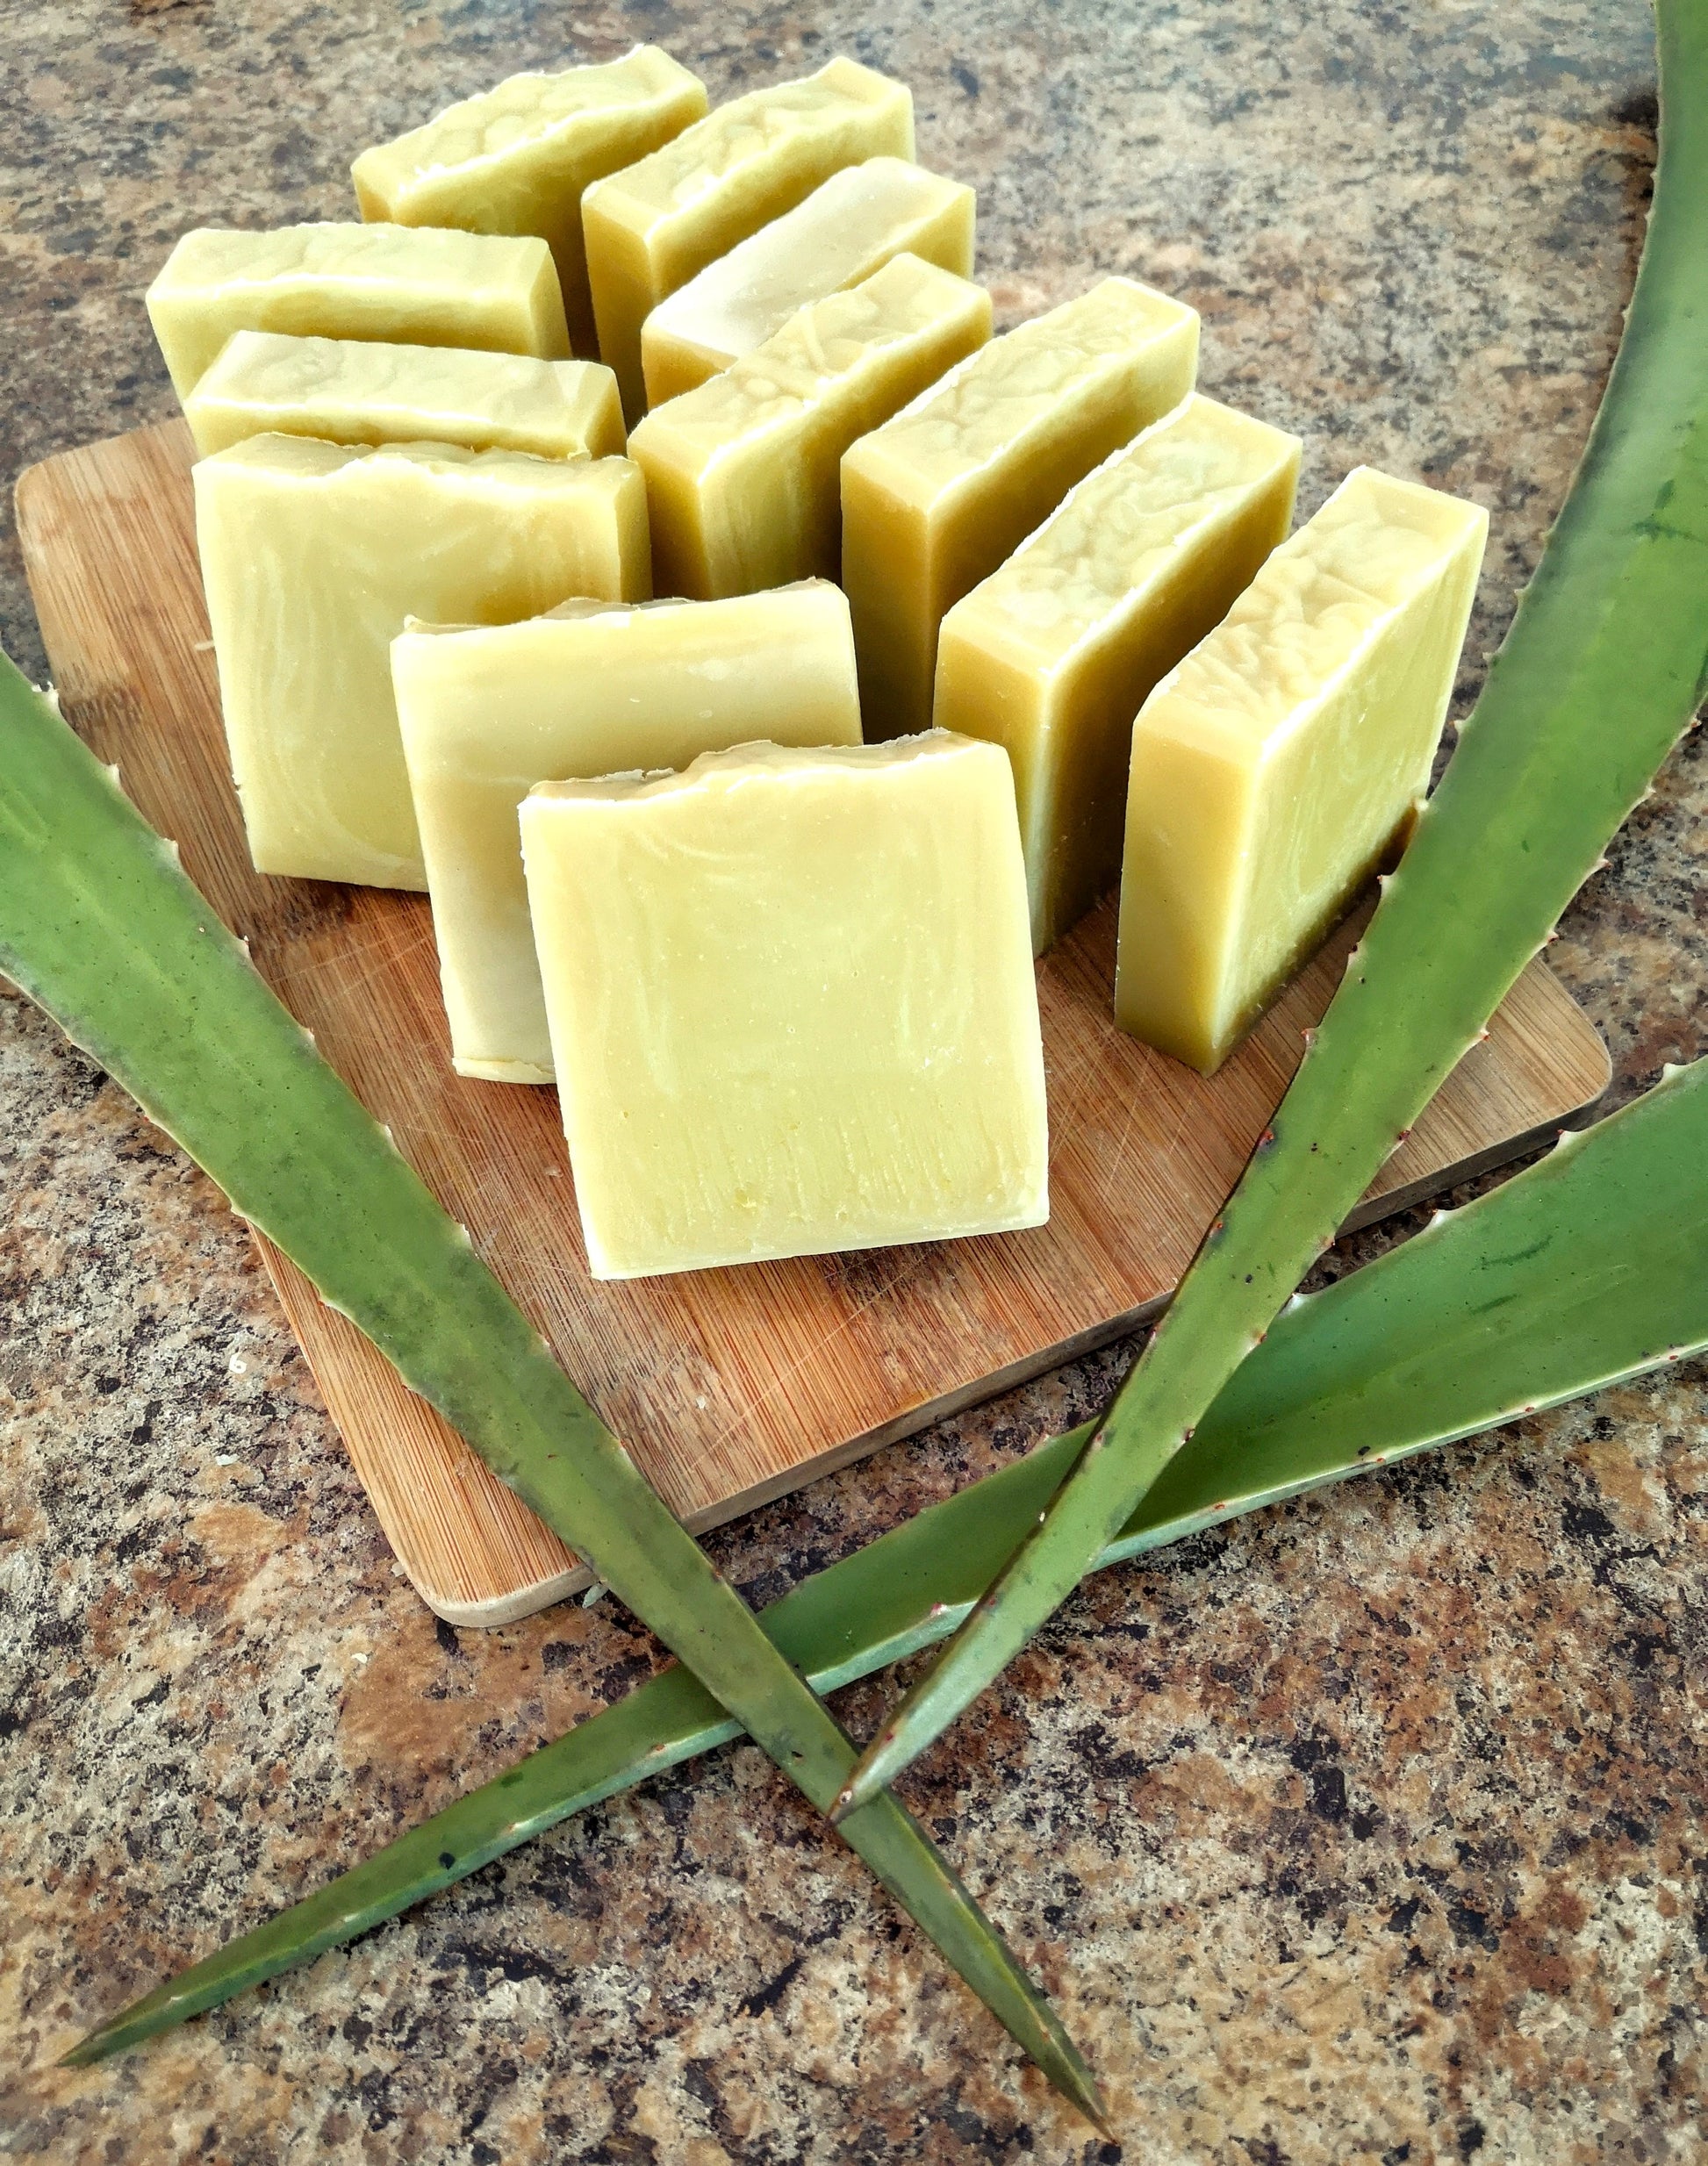 12 bars of yellow/green soap arranged on a wooden cutting board. There are three aloe leaves arranged around the soap. All on a brown and black specked counter top. 